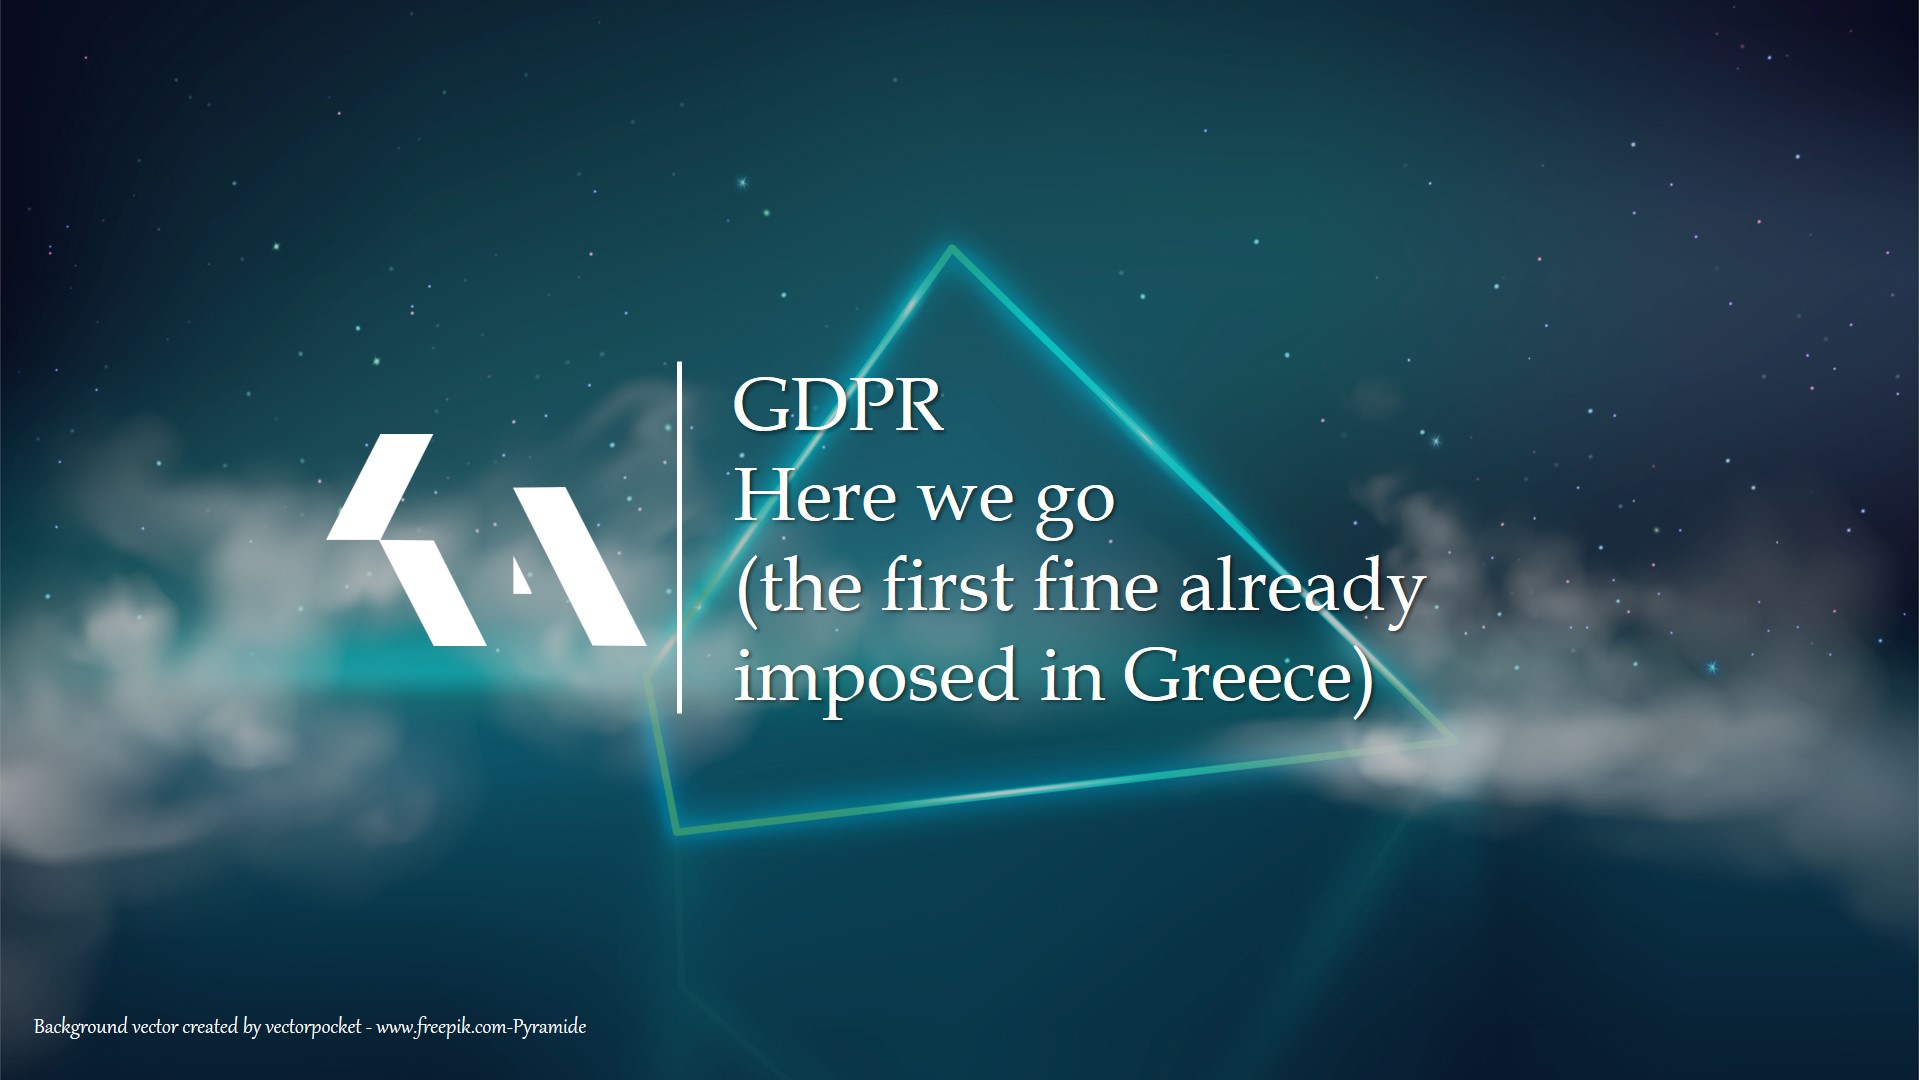 GDPR: Here we go (the first fine already imposed in Greece)